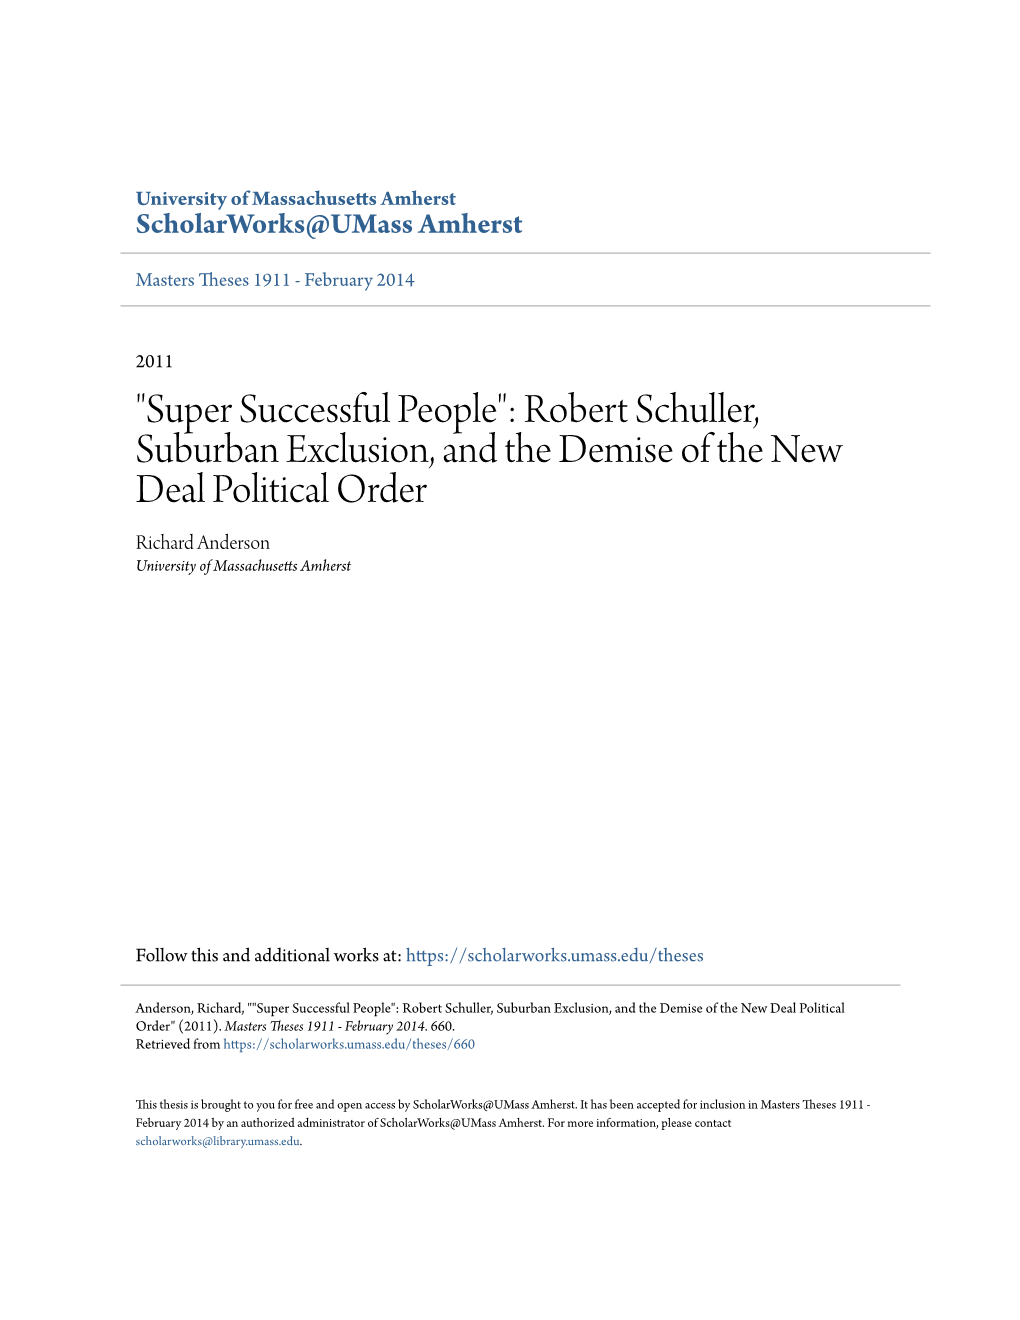 Robert Schuller, Suburban Exclusion, and the Demise of the New Deal Political Order Richard Anderson University of Massachusetts Amherst